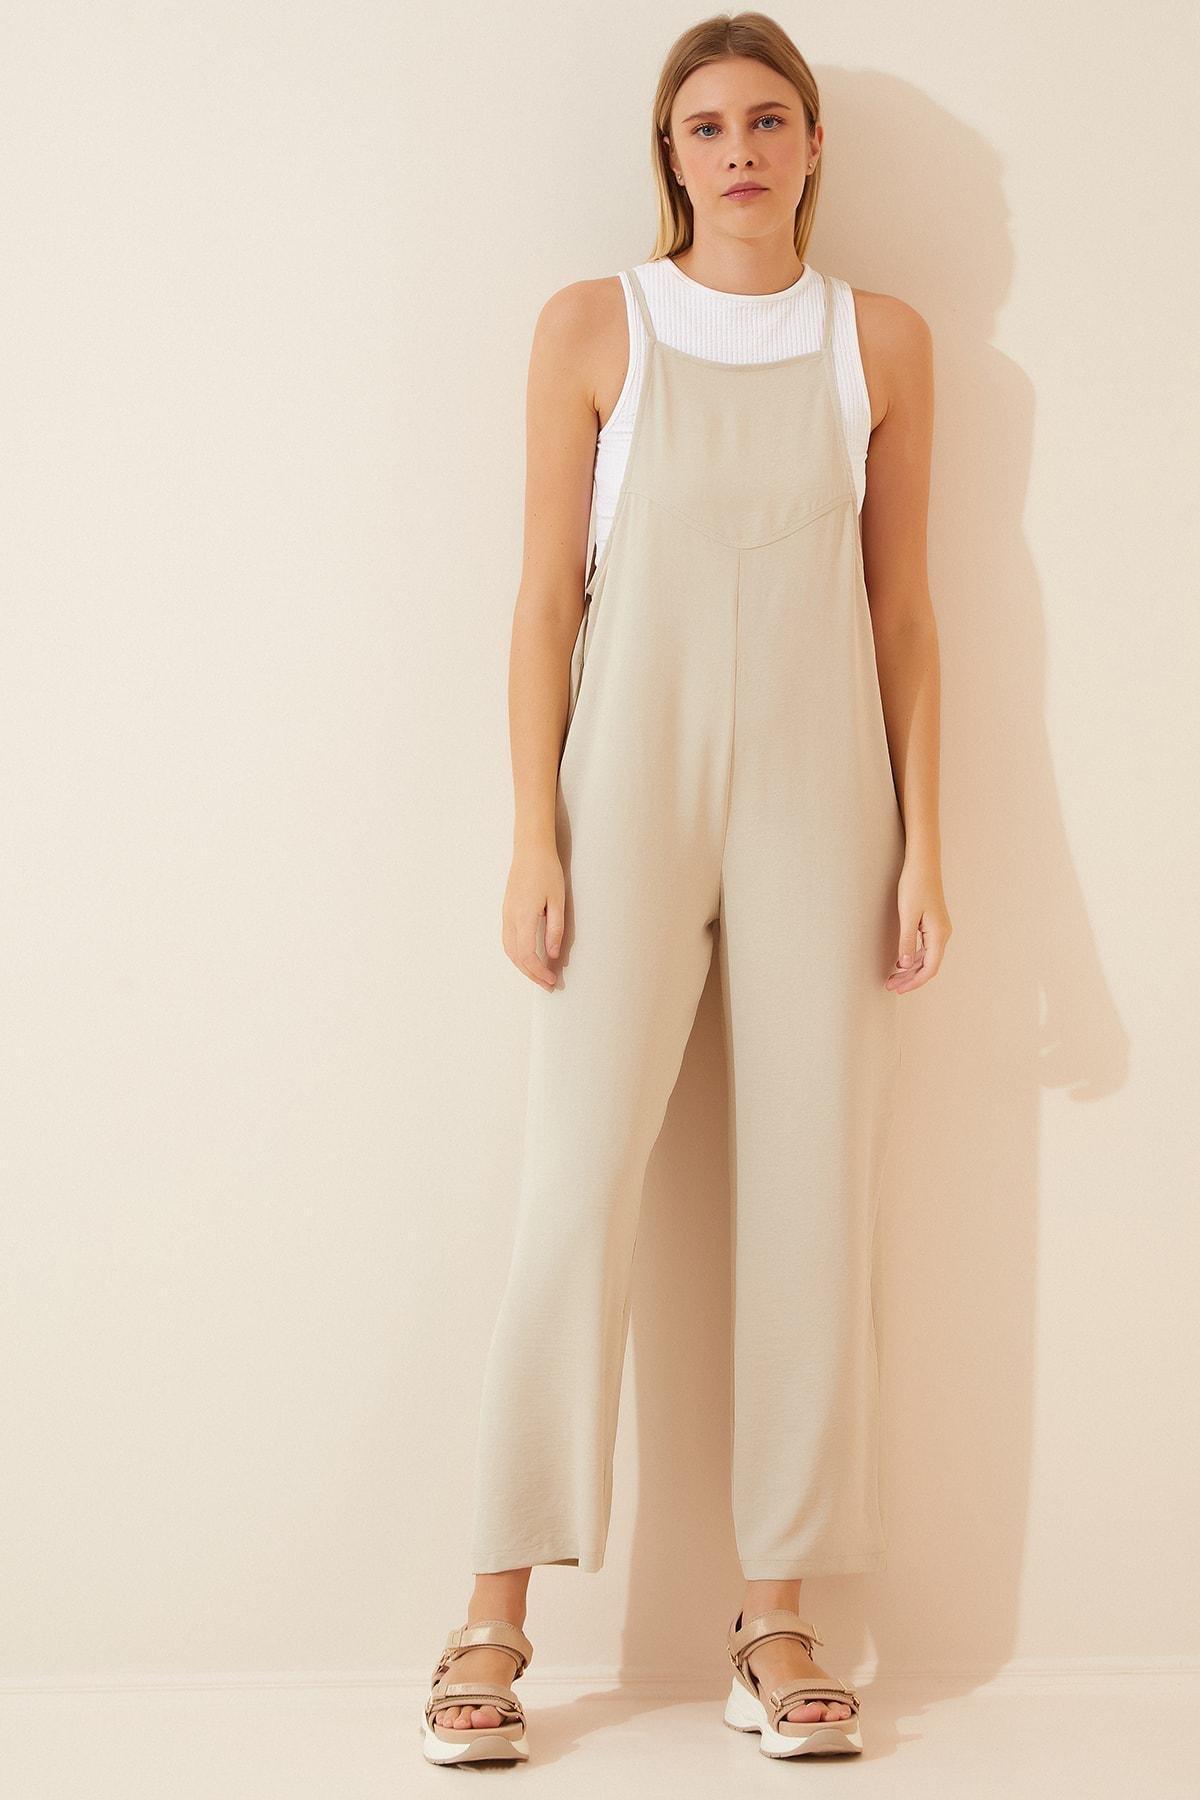 Happiness Istanbul - Beige Square Collar Jumpsuit